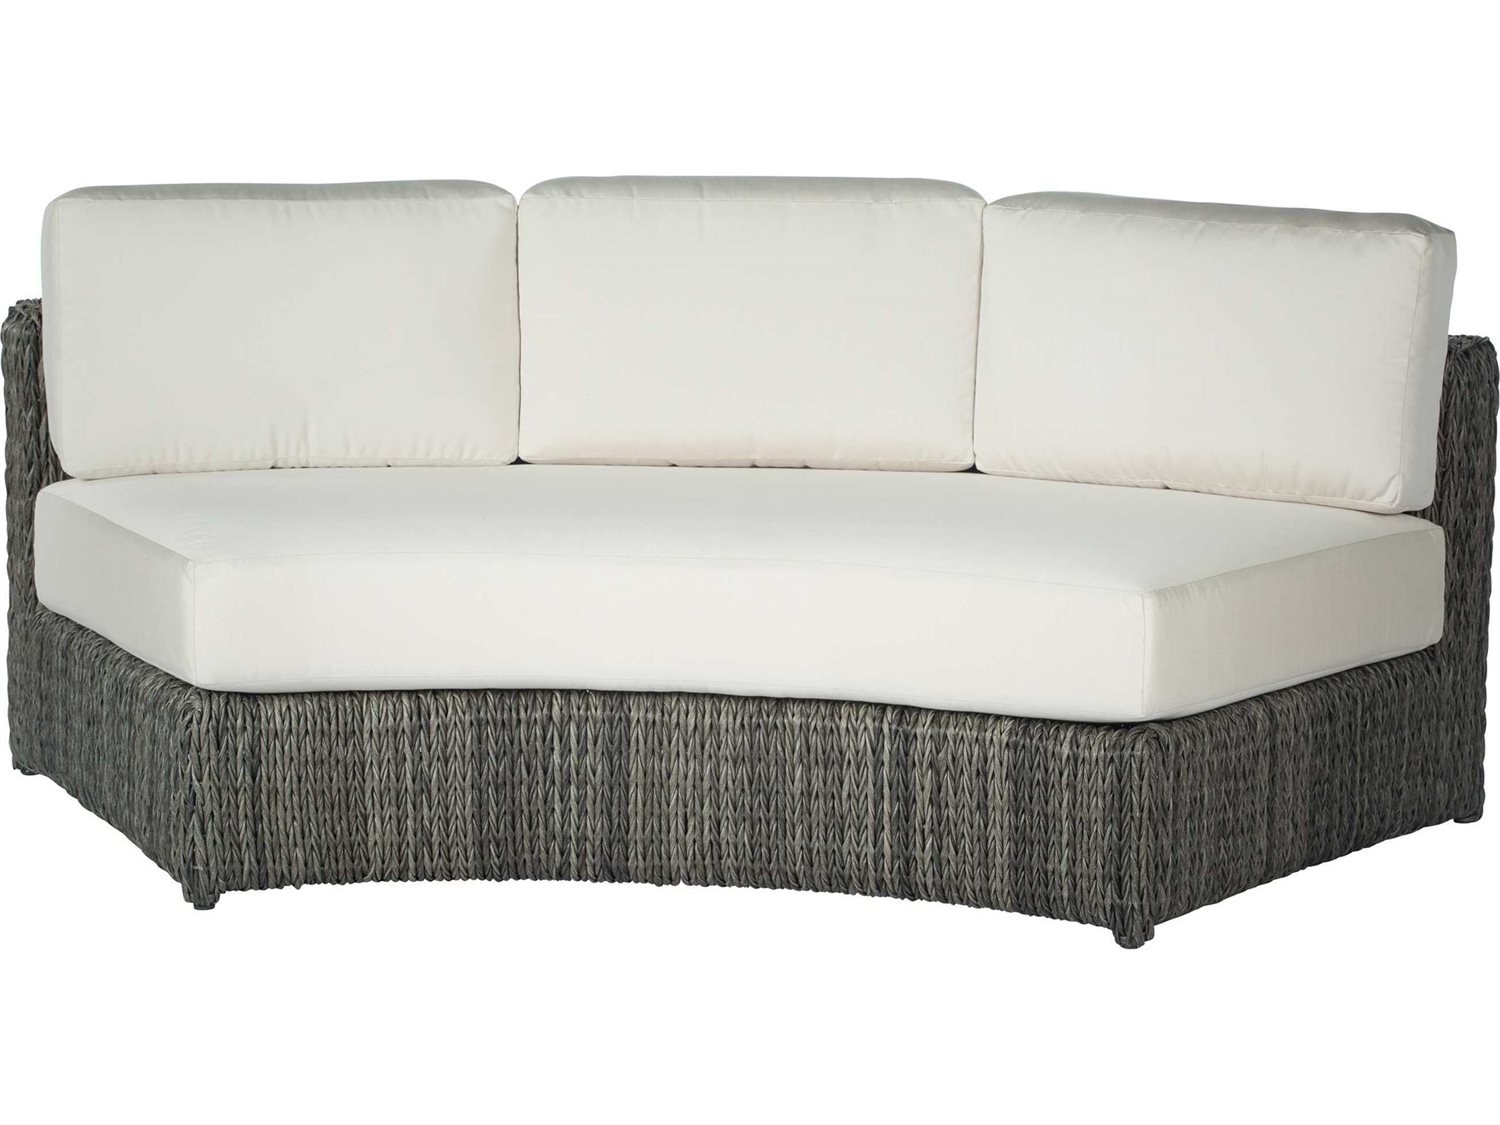 Replacement Cushions For Curved Outdoor Sofa | Baci Living Room